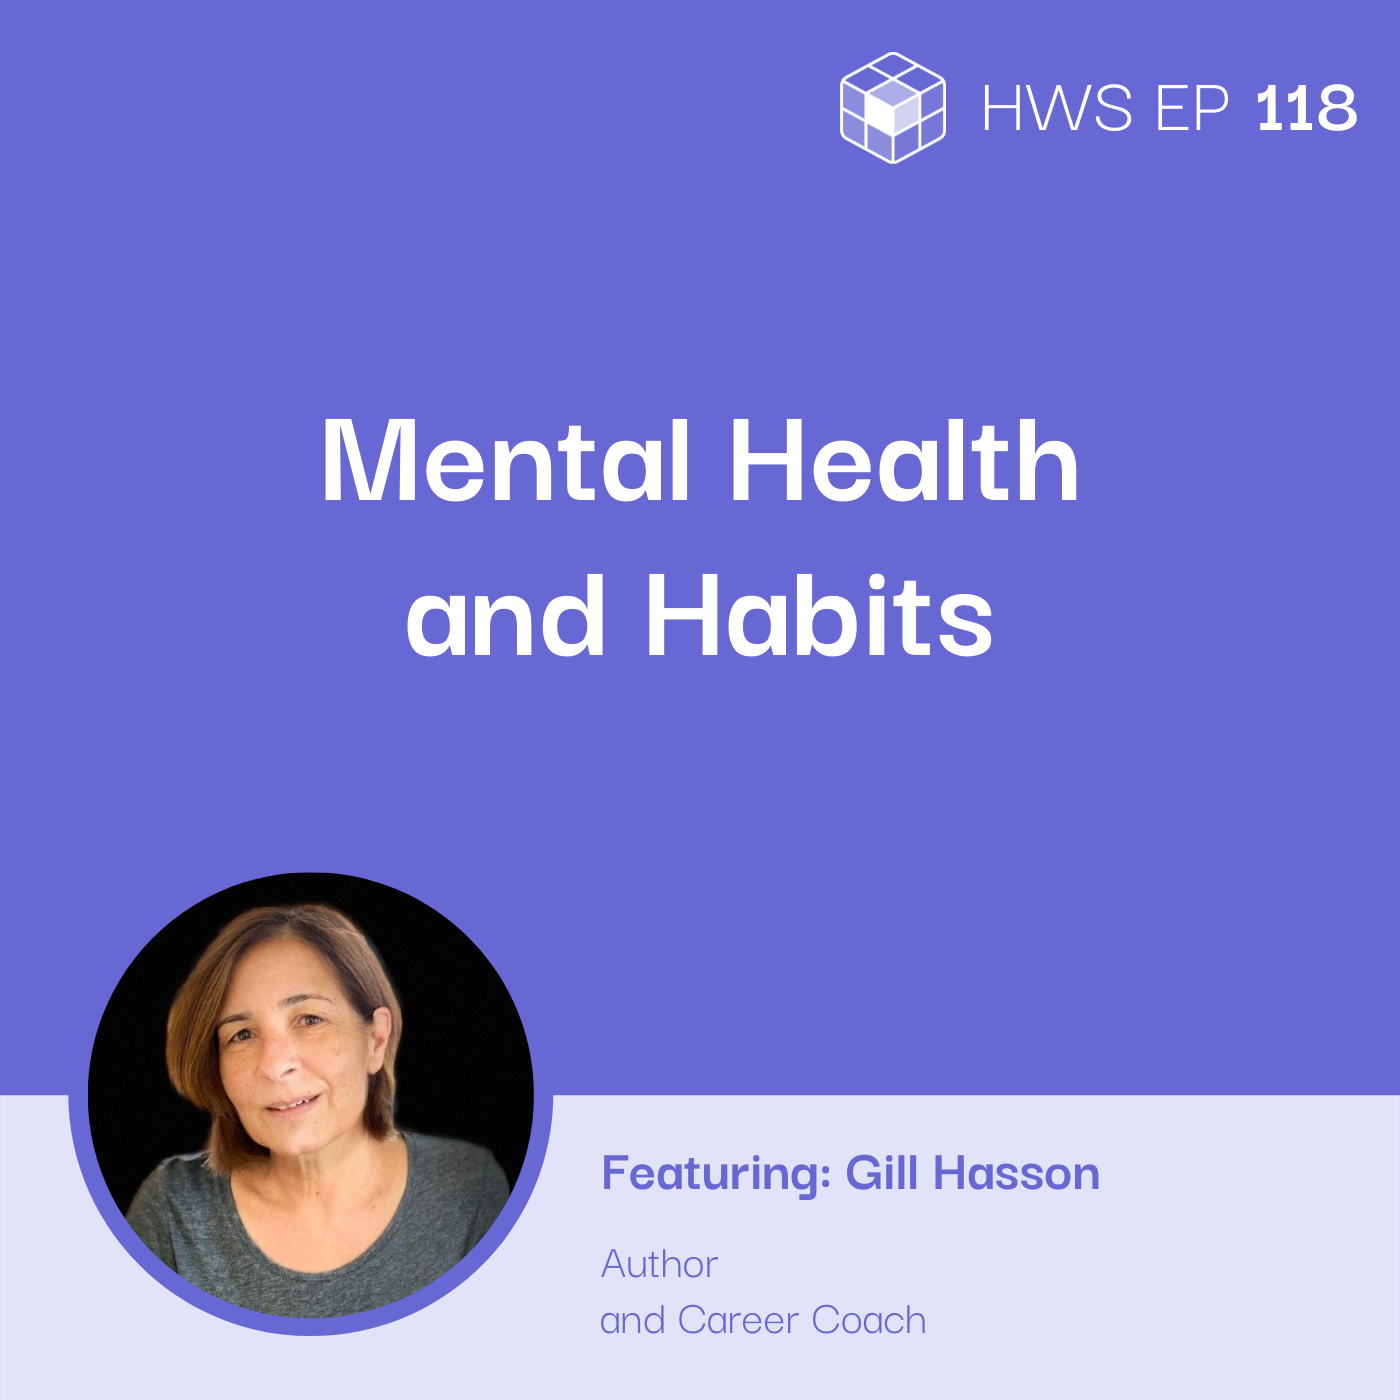 Gill Hasson - Employee Mental Health